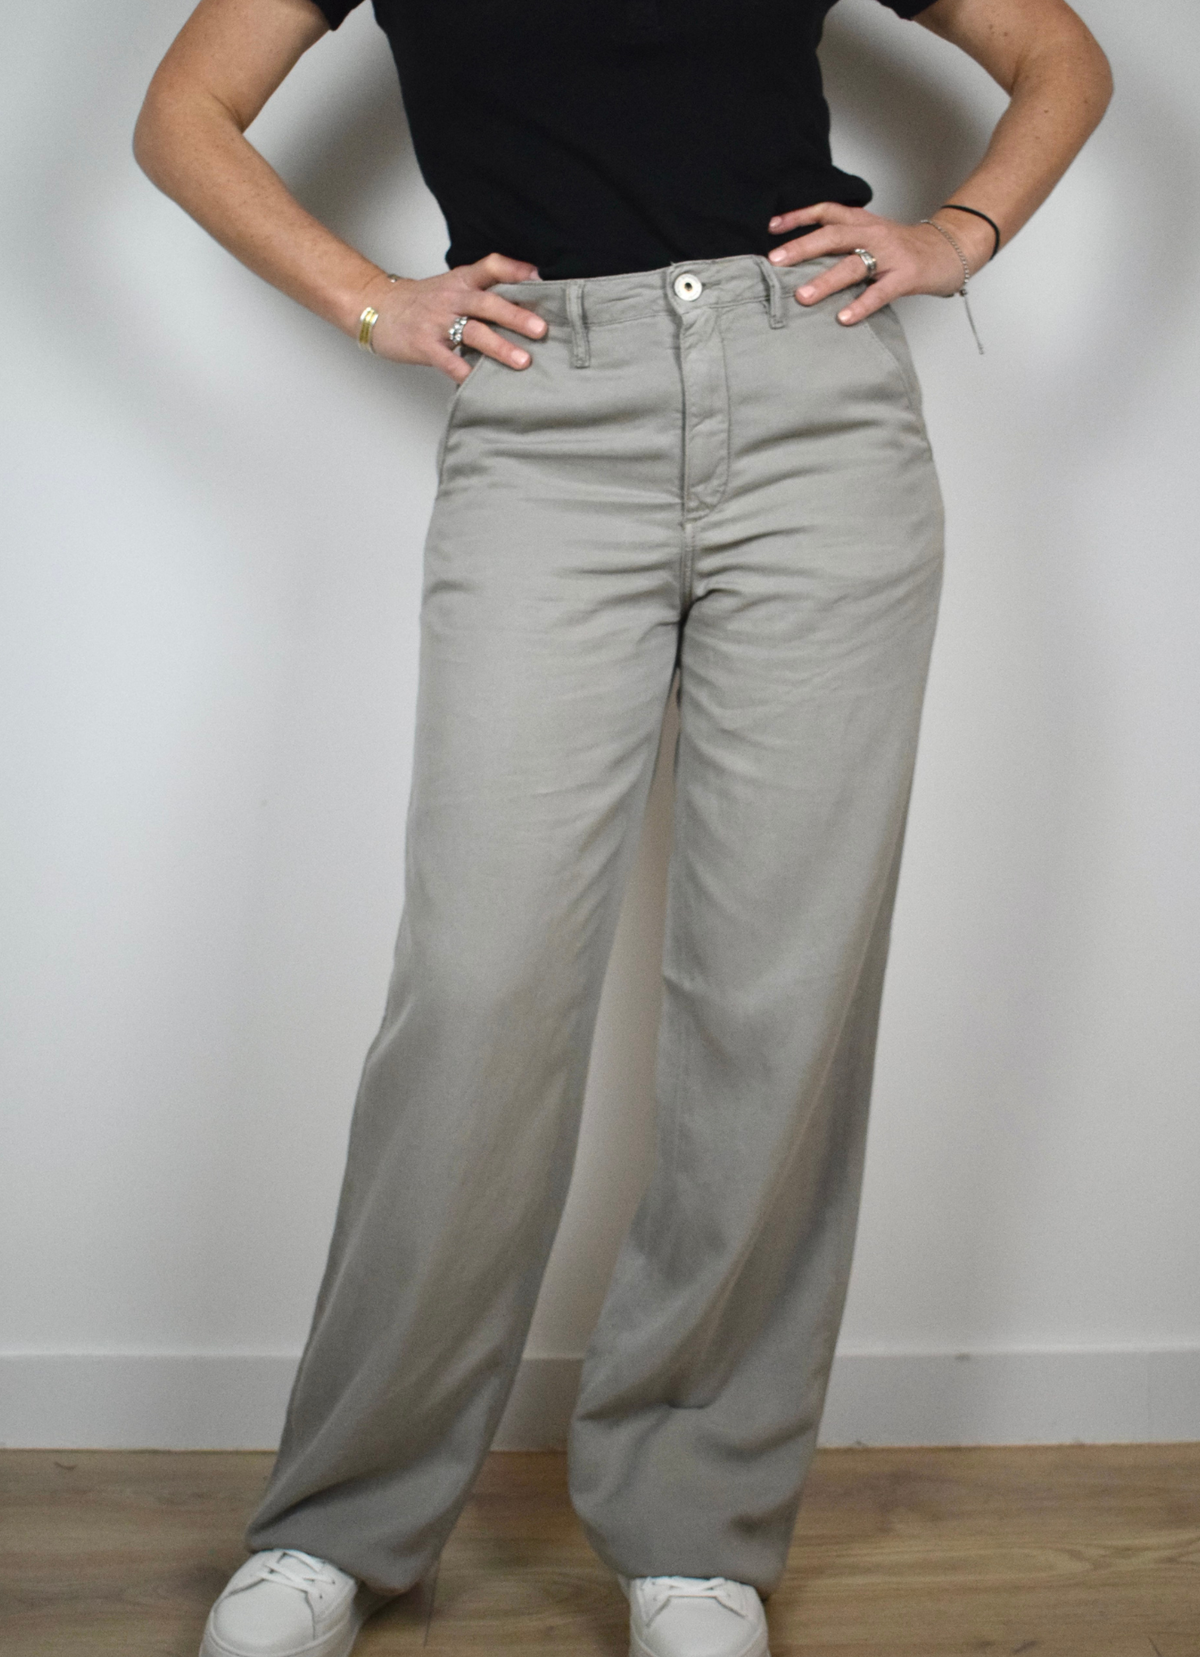 Wide leg grey trousers with mid to high rise